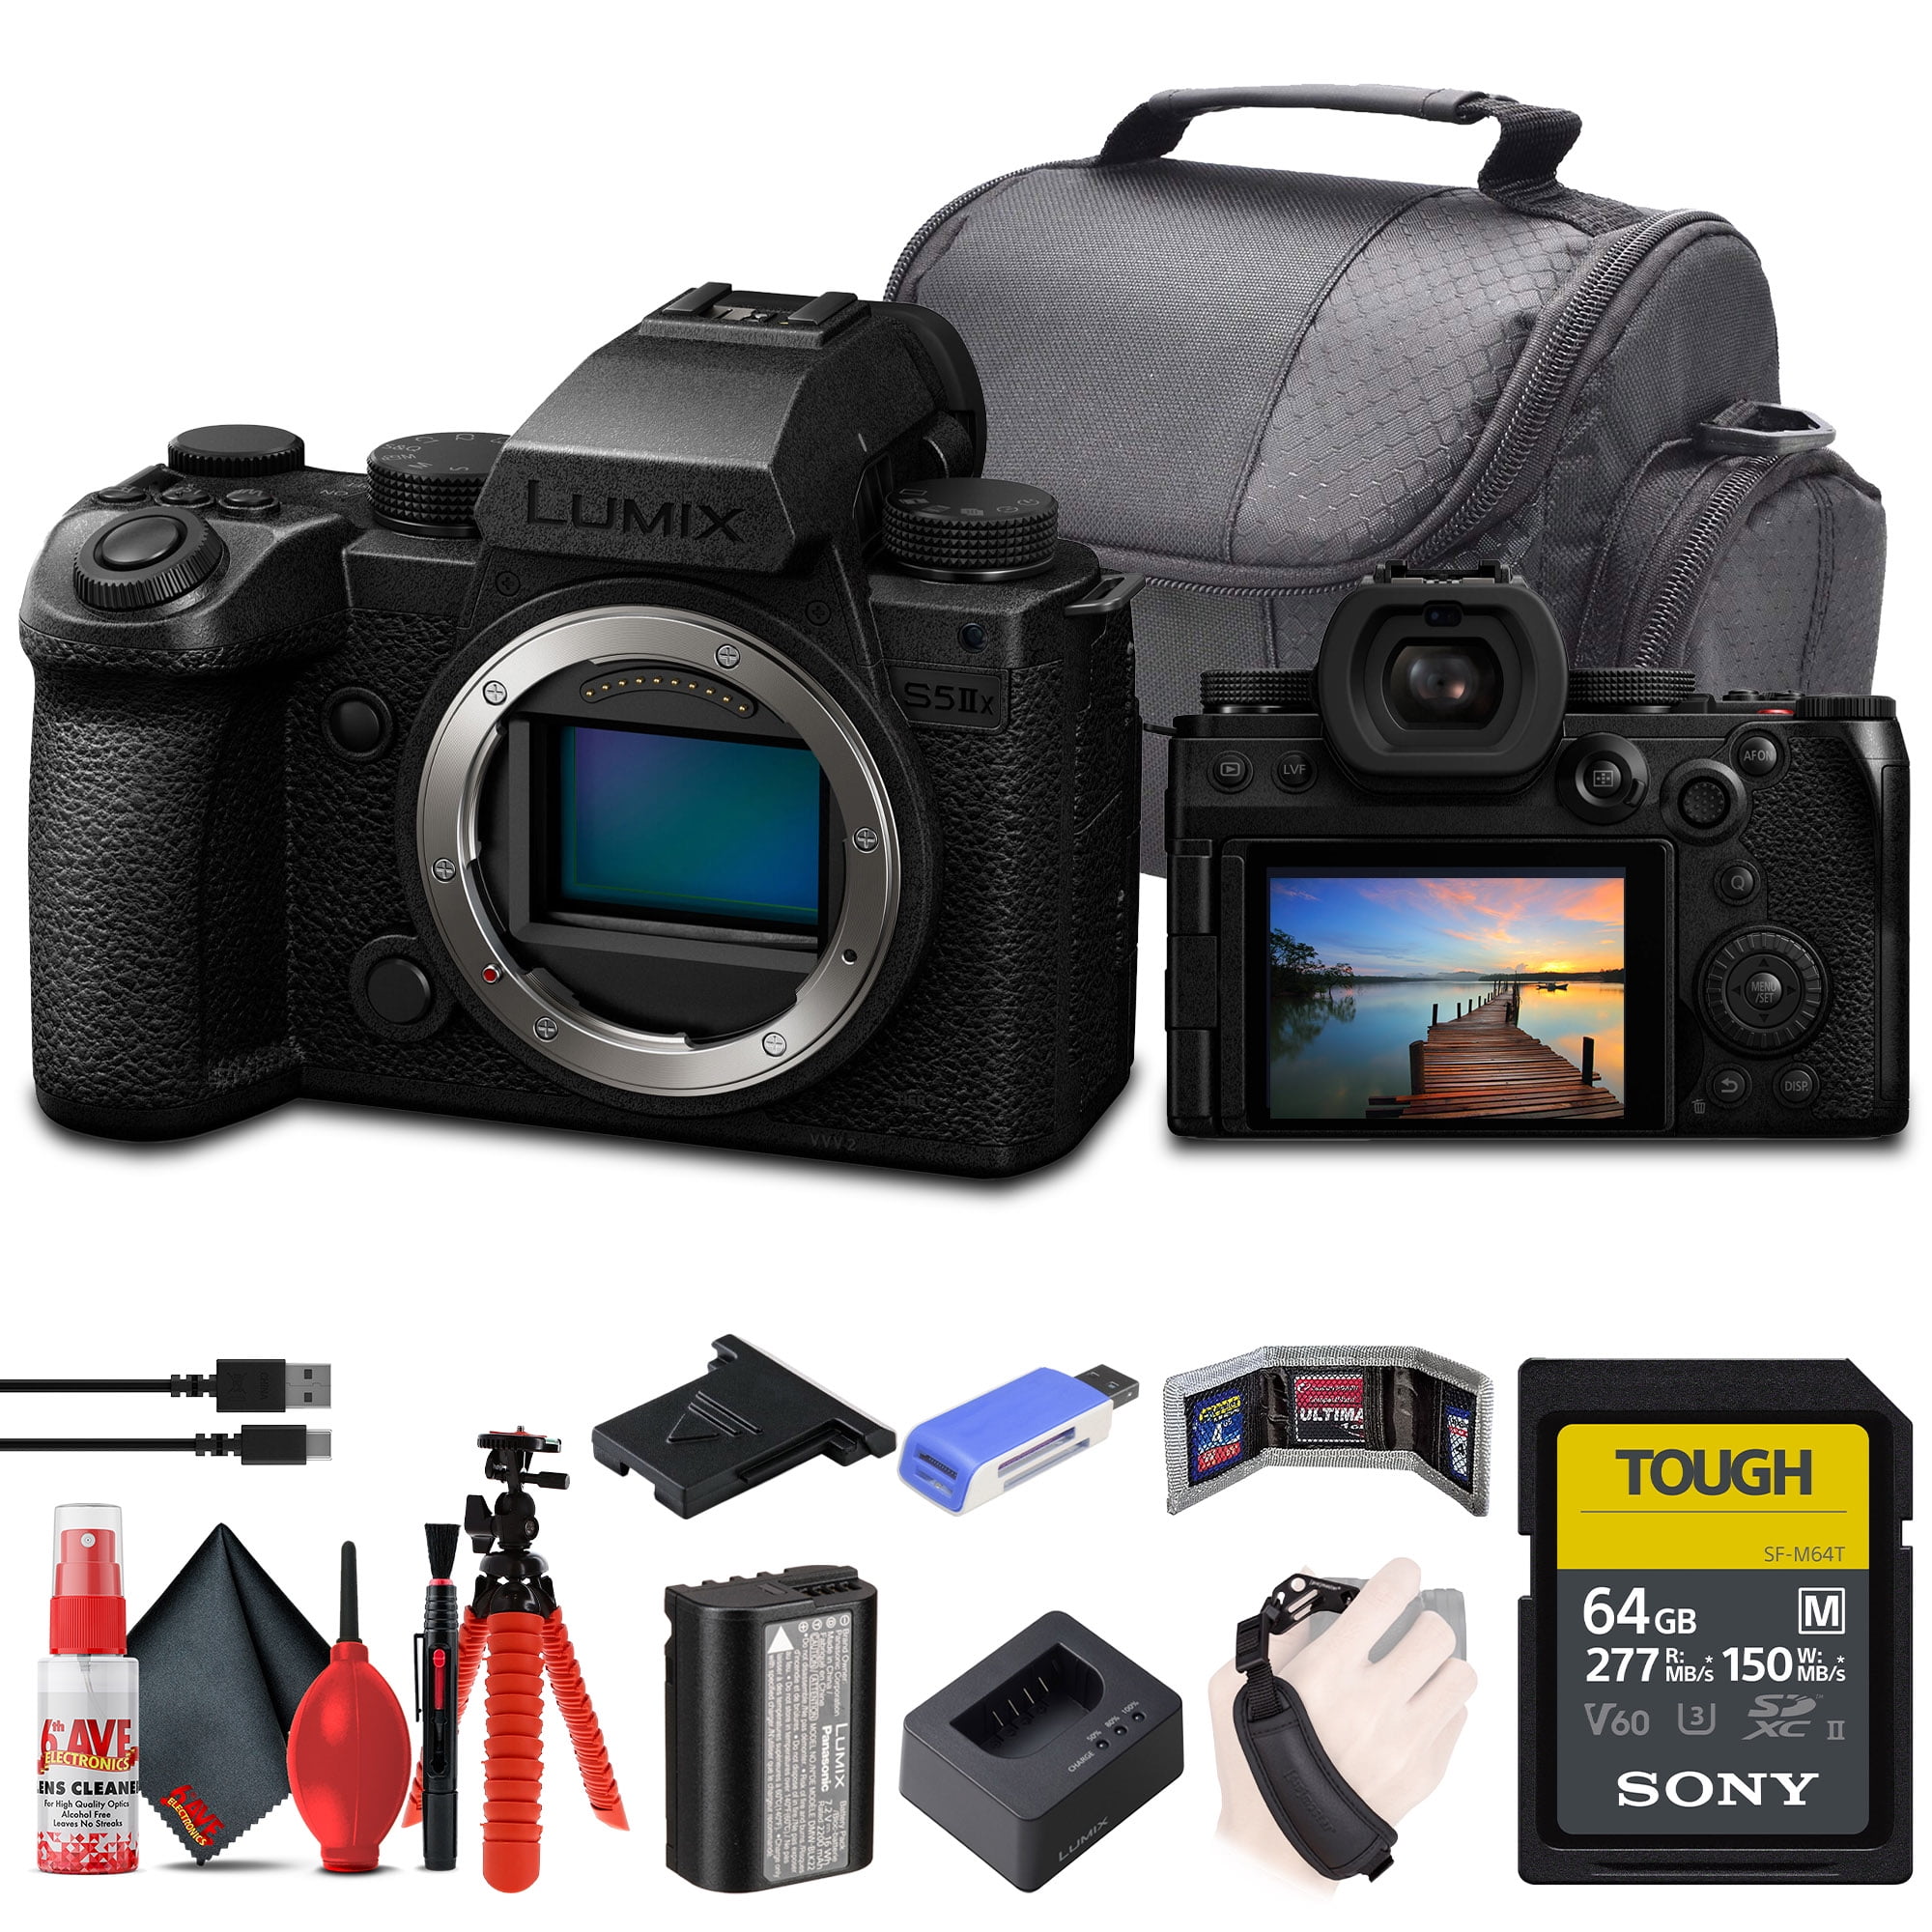 Panasonic Lumix S5 II Mirrorless Camera with 20-60mm Lens (DC-S5M2KK) +  64GB Memory Card + Filter Kit + Color Filter Kit + Corel Photo Software +  DMW-BLK22 Battery + Bag + Charger + More 